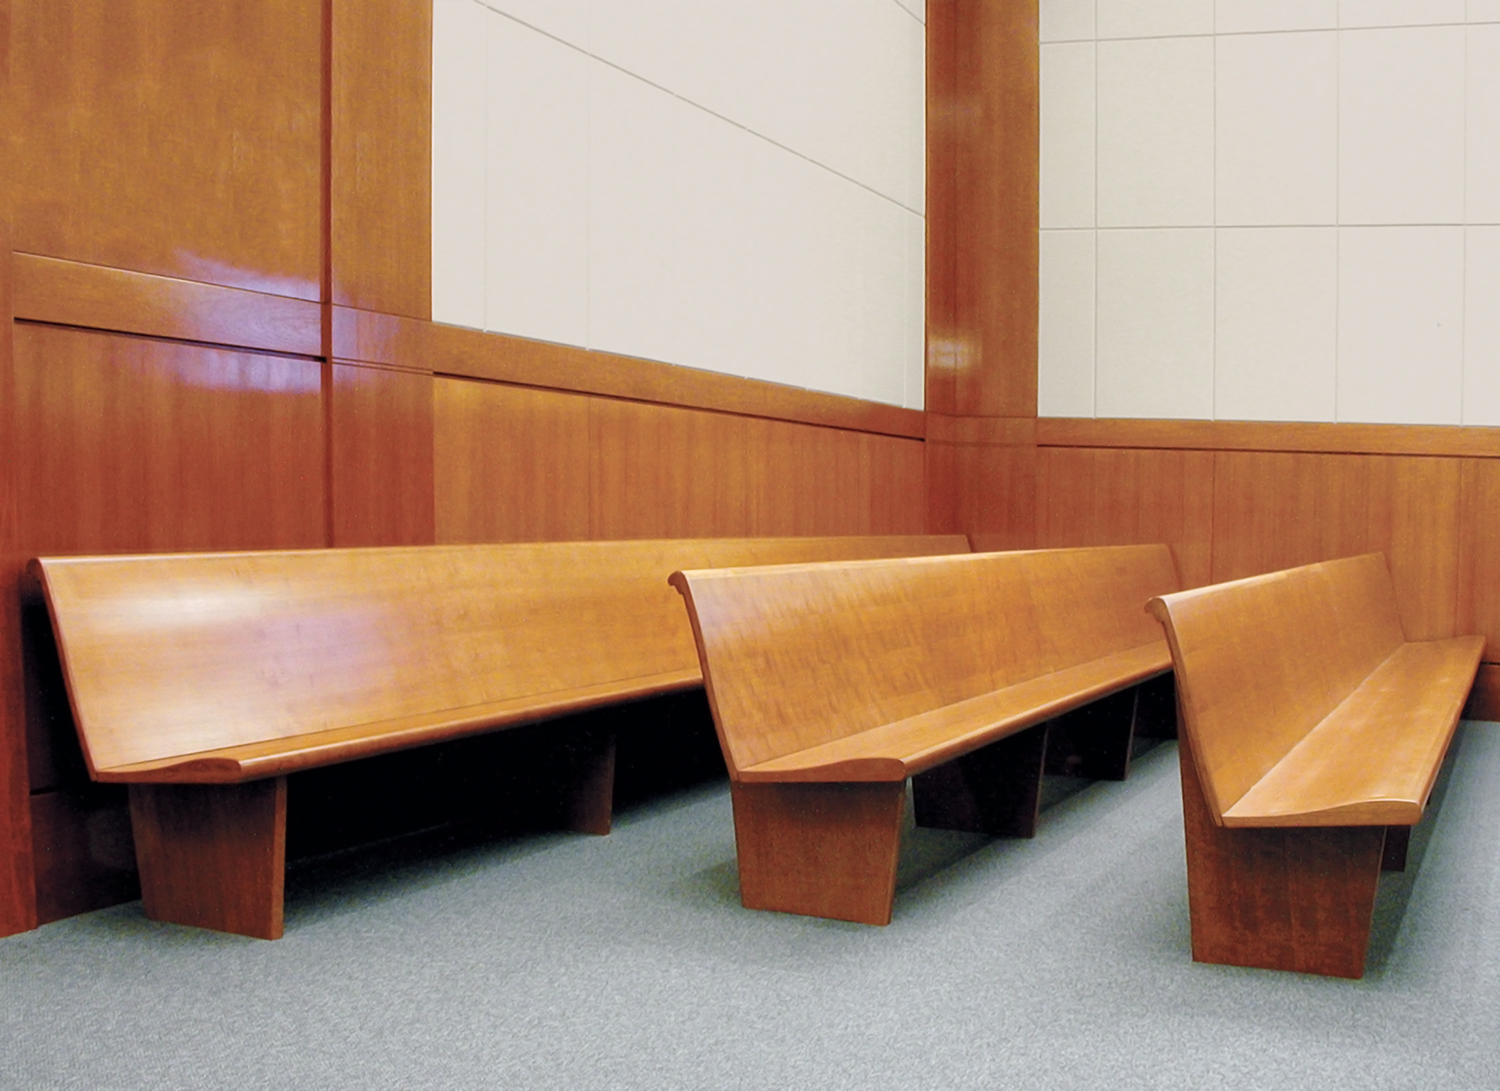 Straight Wood Benches inside Helena Courts - Helena, MT